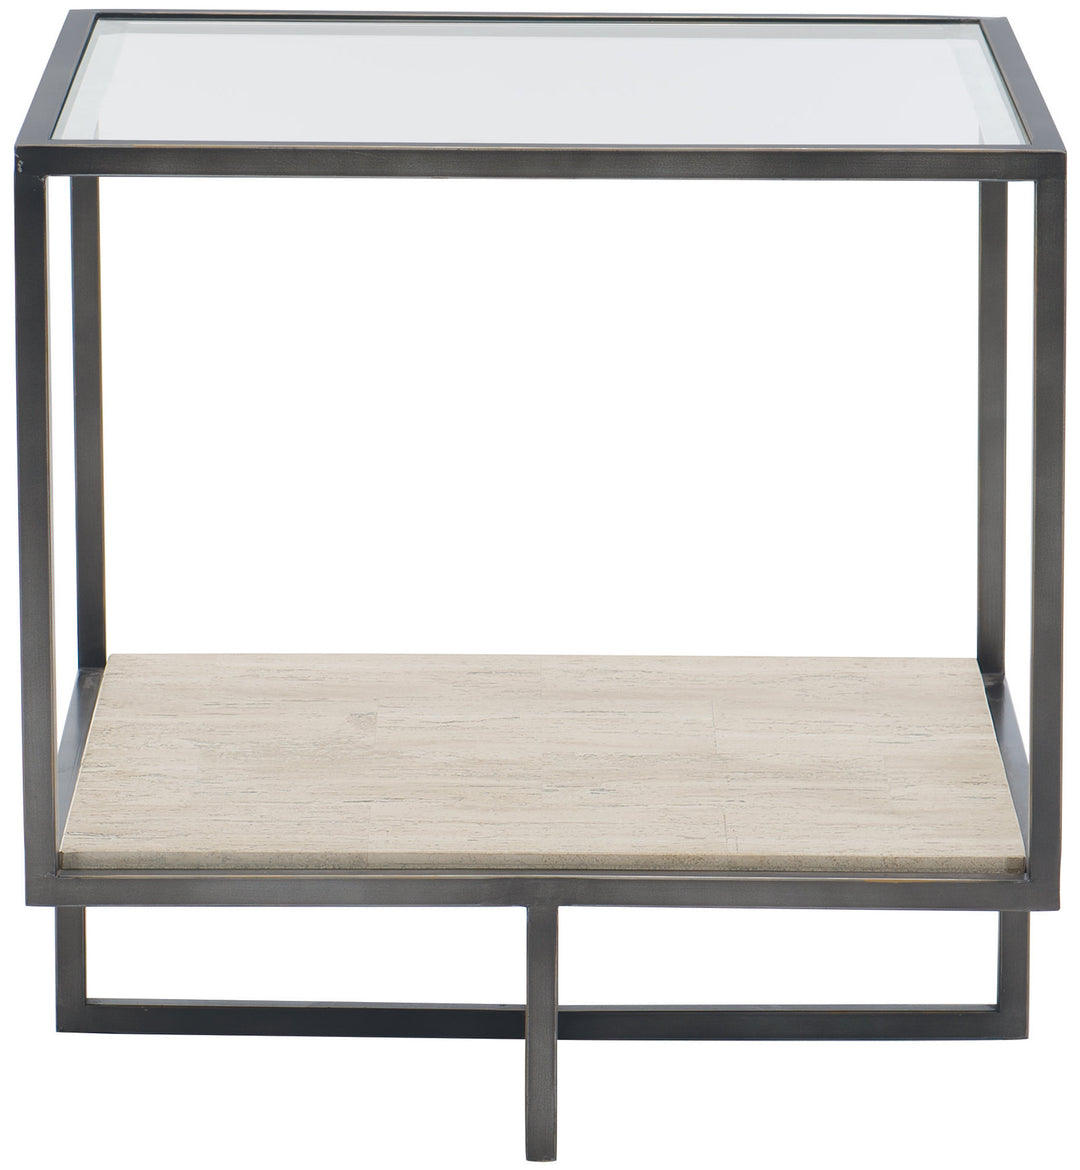 HARLOW END TABLE